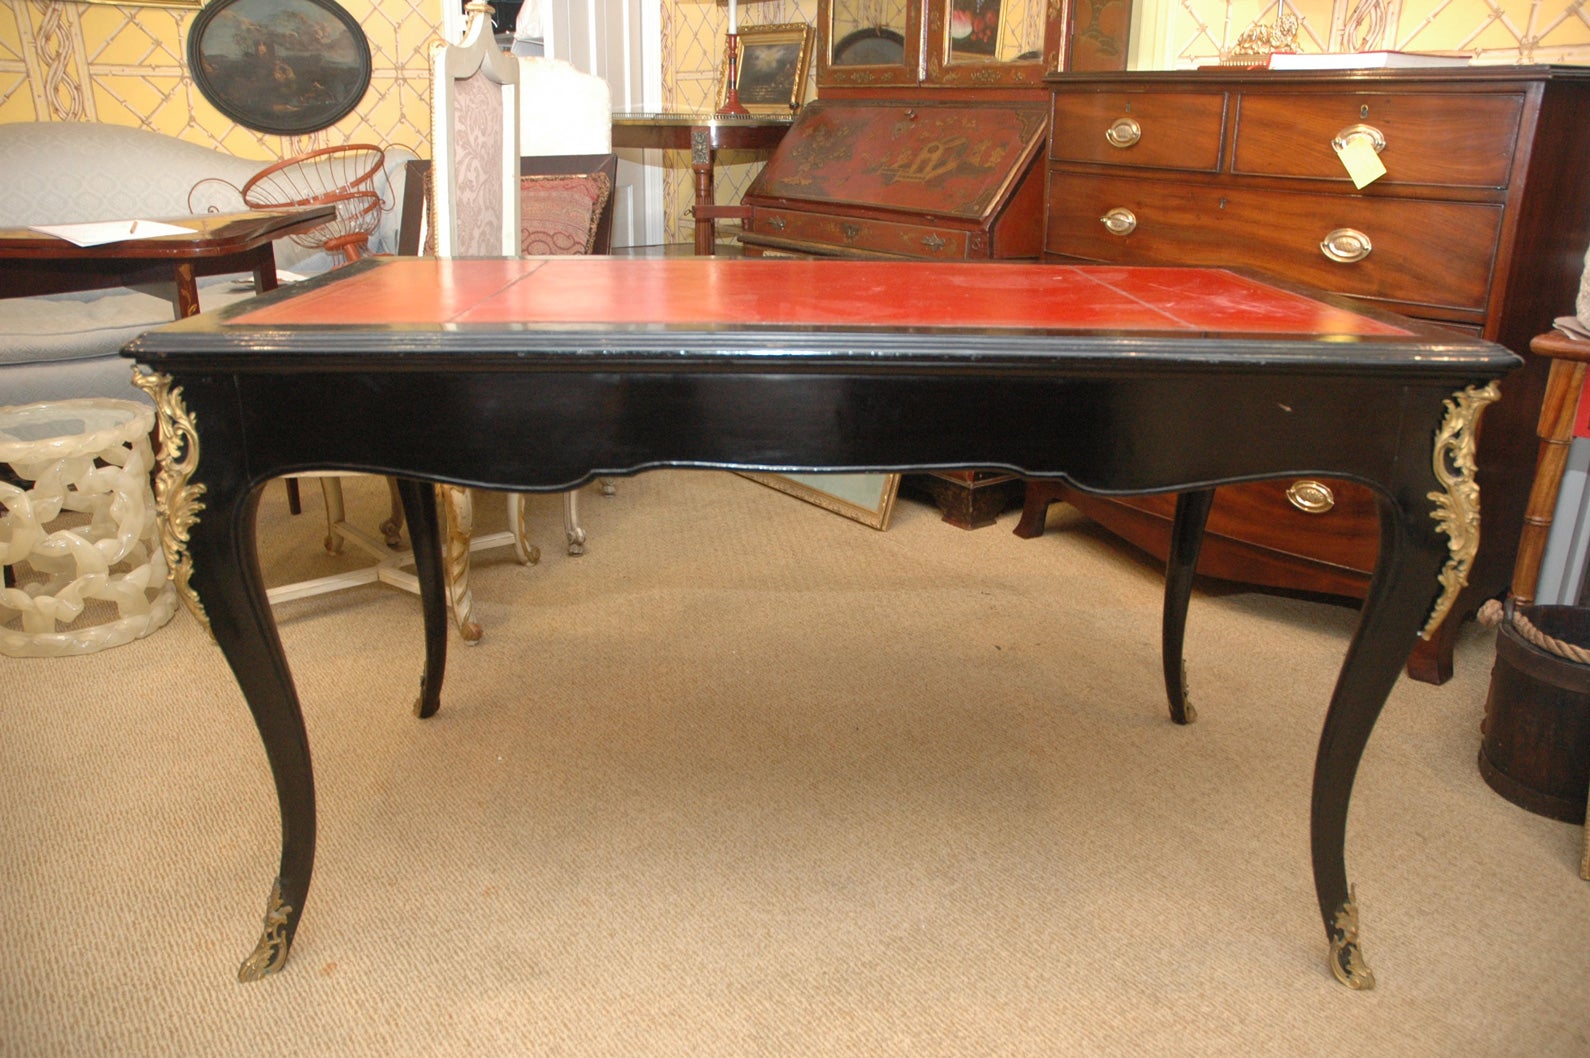 French 19th Century Regency style ebonized bureau plat having ormolu angles on cabriole legs ending in sabots. Original red leather top trimmed with gold tooling.  Two frontal drawers extend to back of the bureau plat.